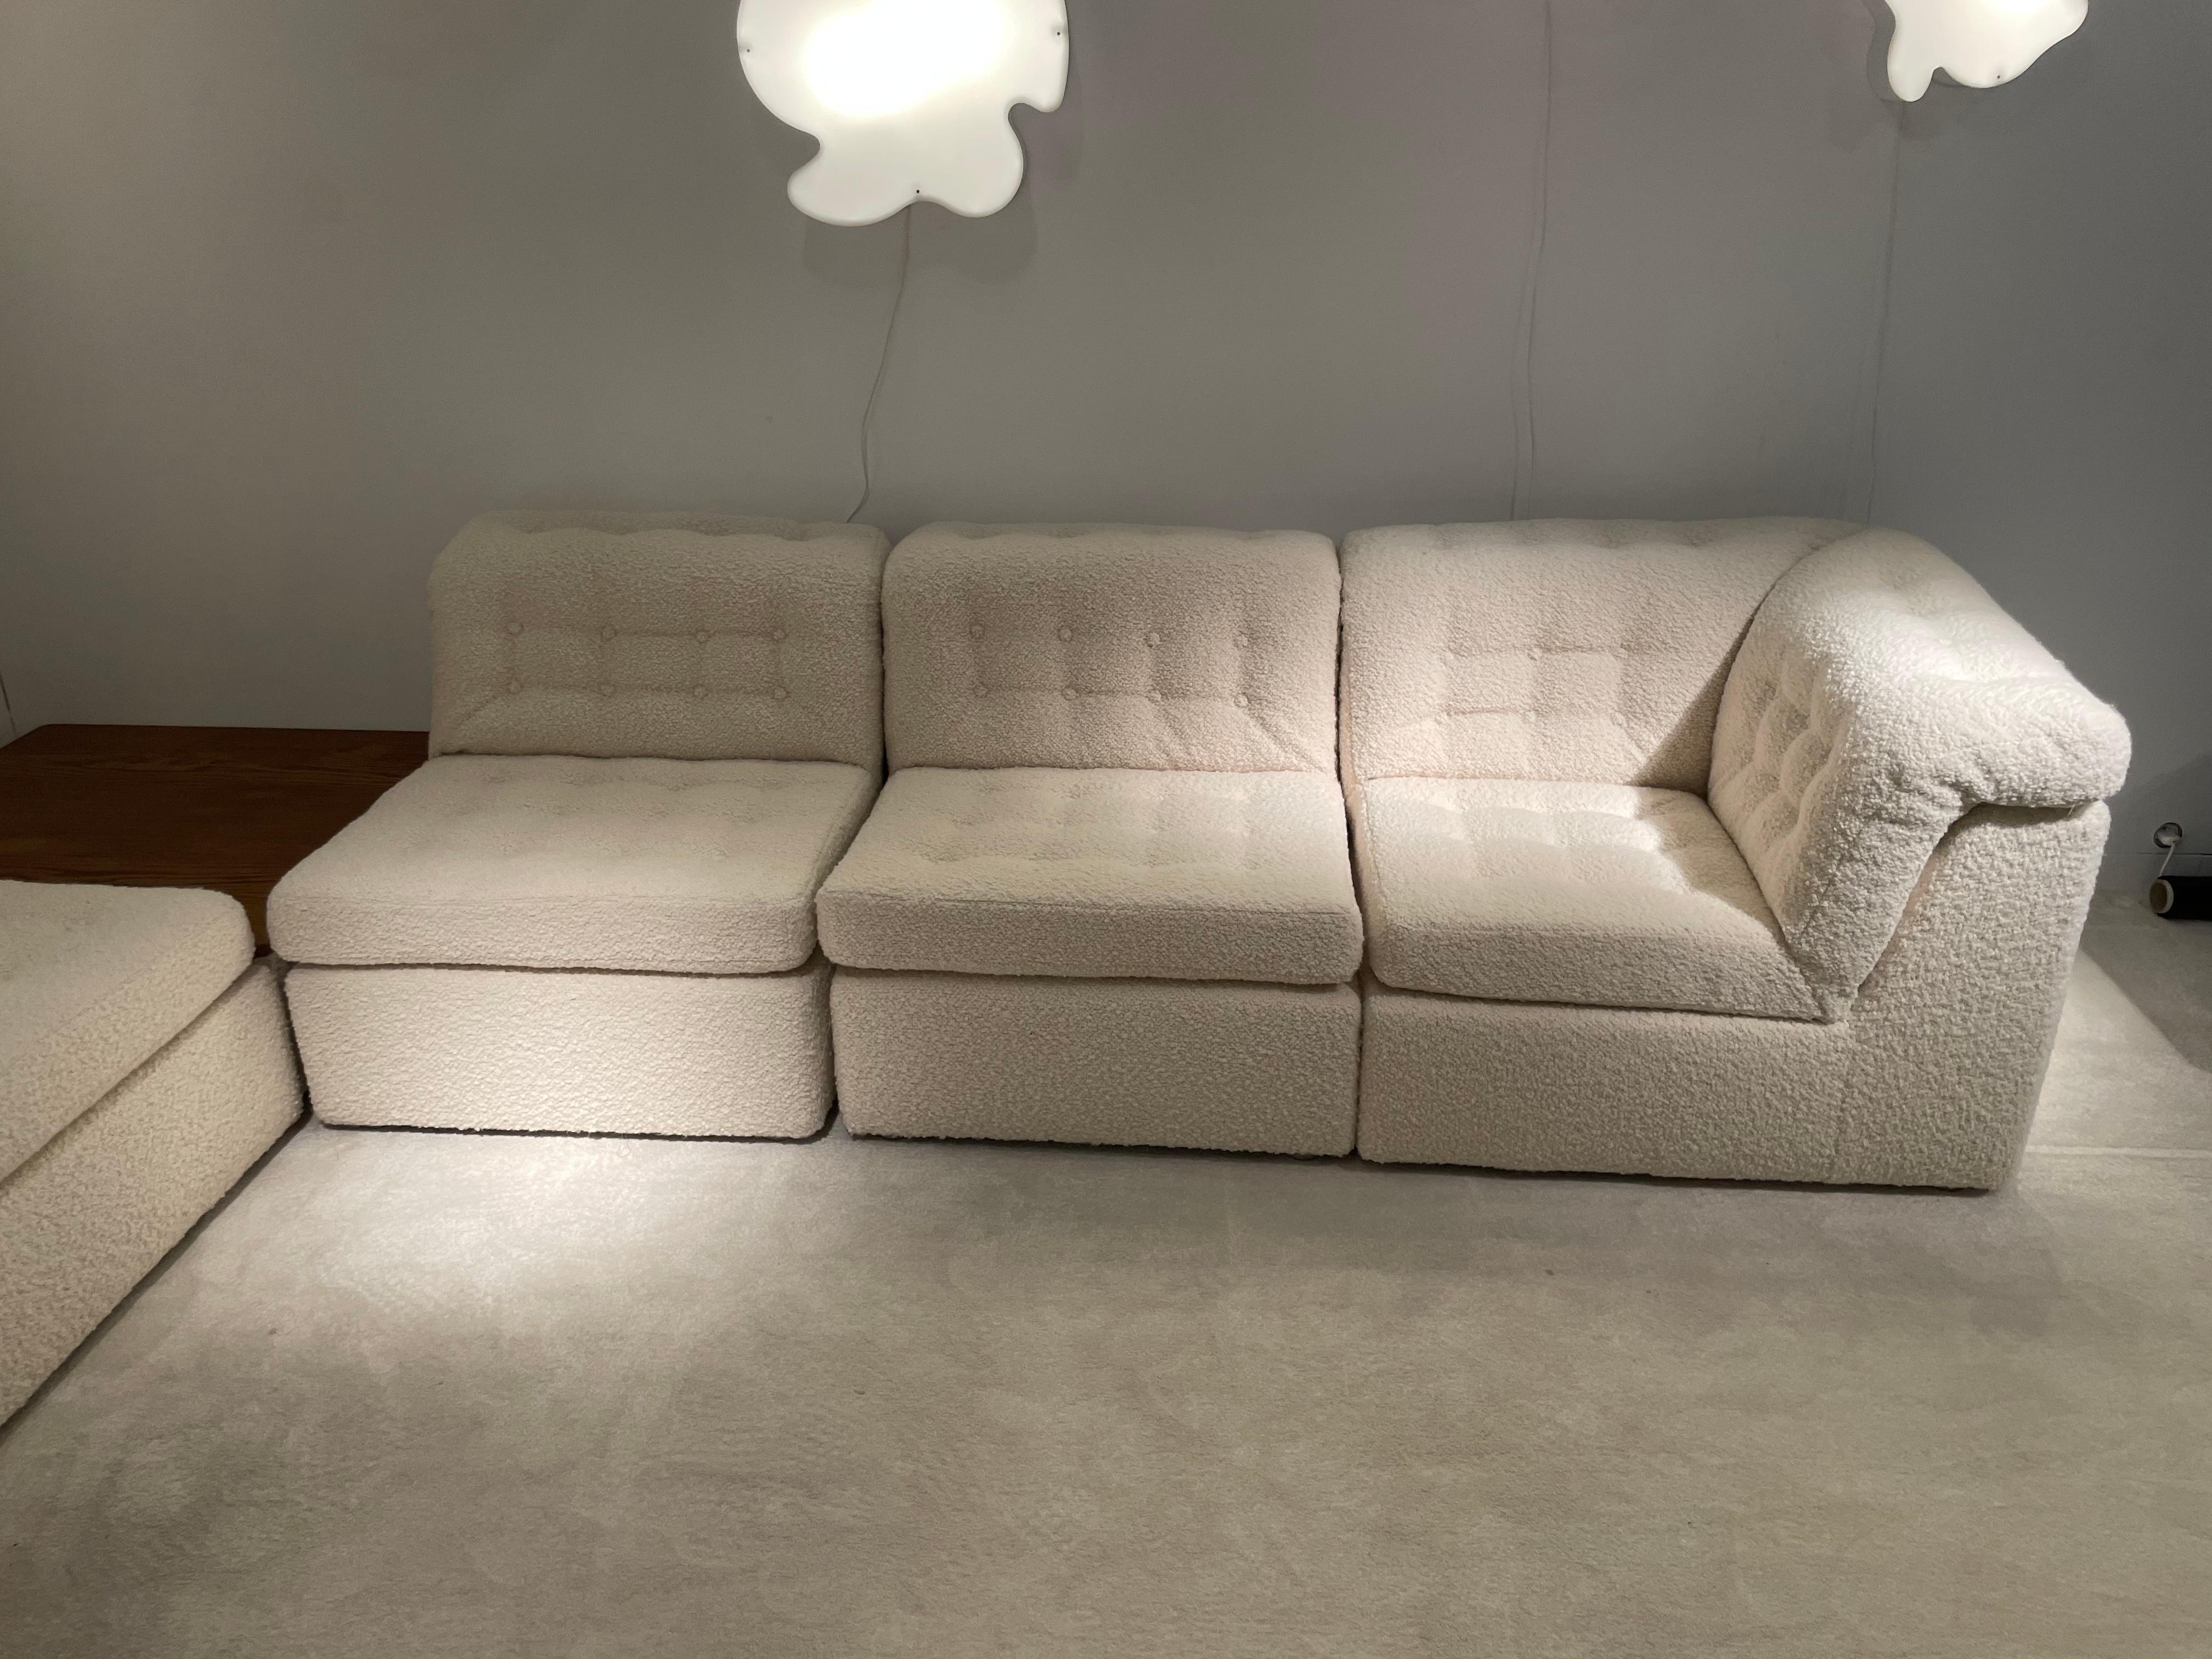 Modular sofa by Giuseppe Rossi.
From 1970.